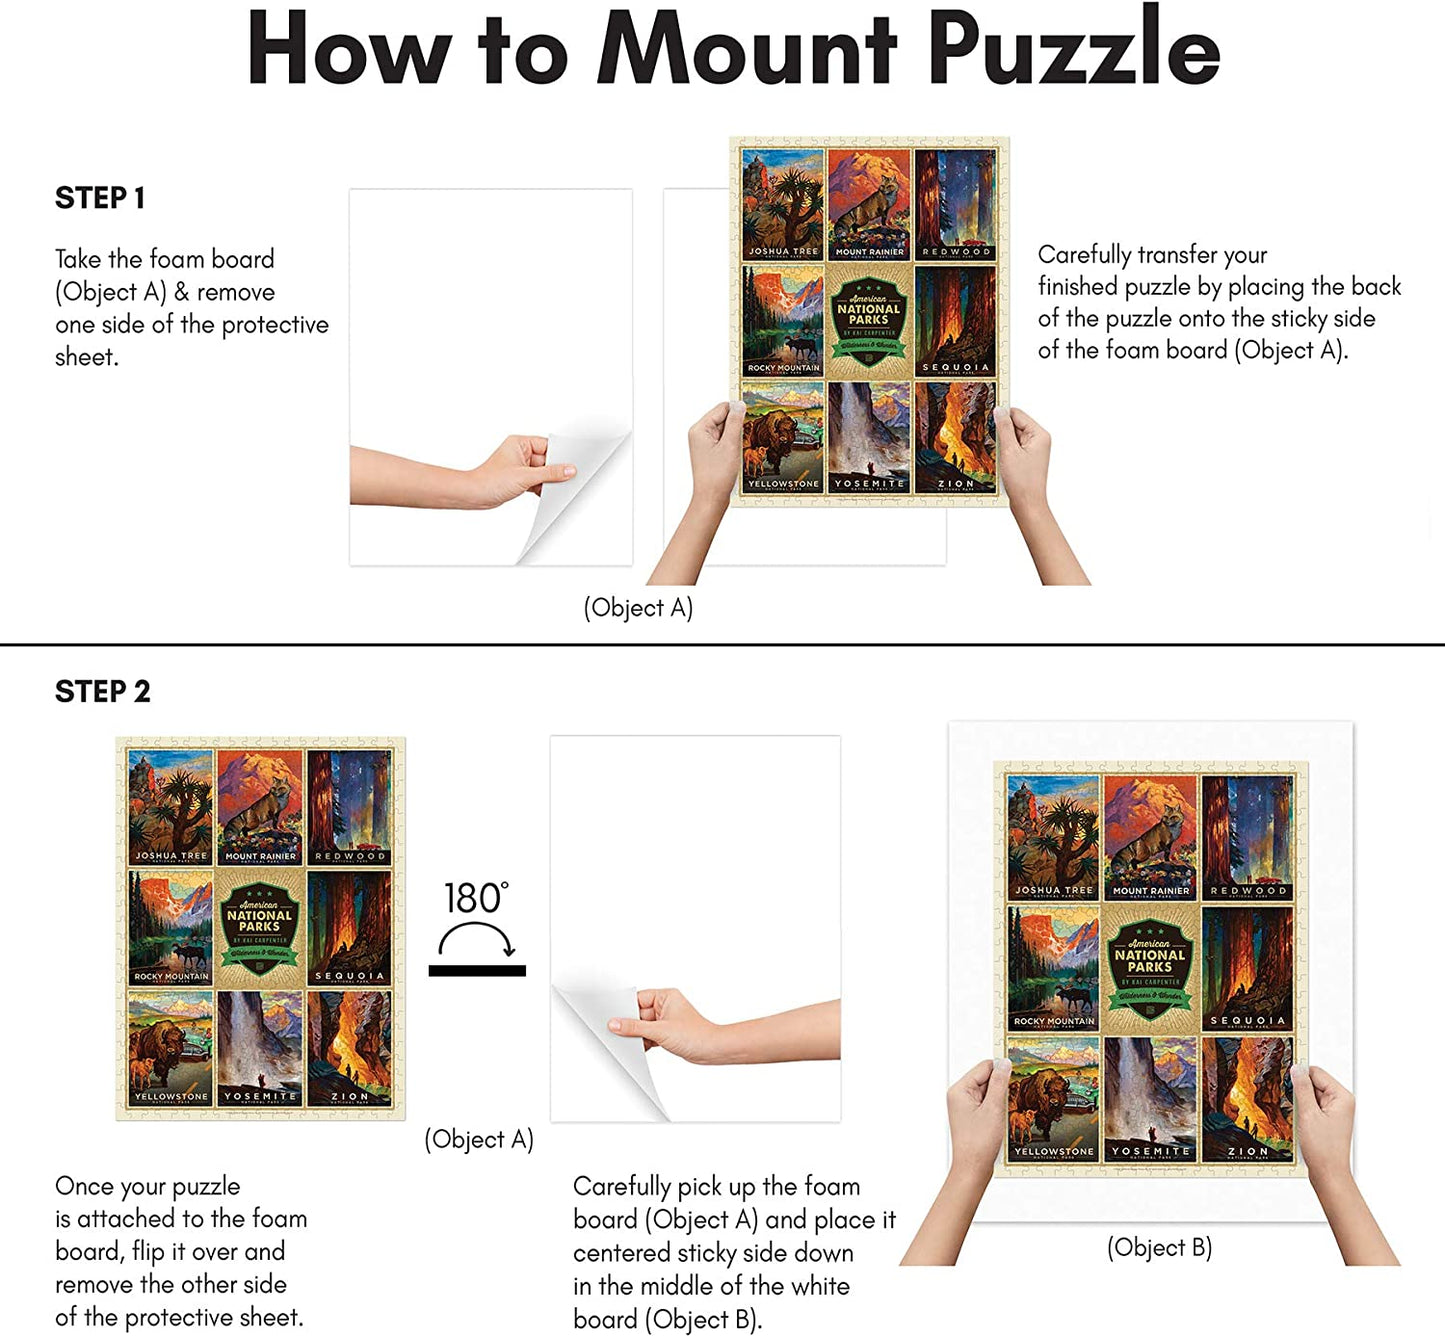 Puzzle Frame - Peel and Stick Board Included - Composite Wood Puzzle Poster Frame with Plexiglass